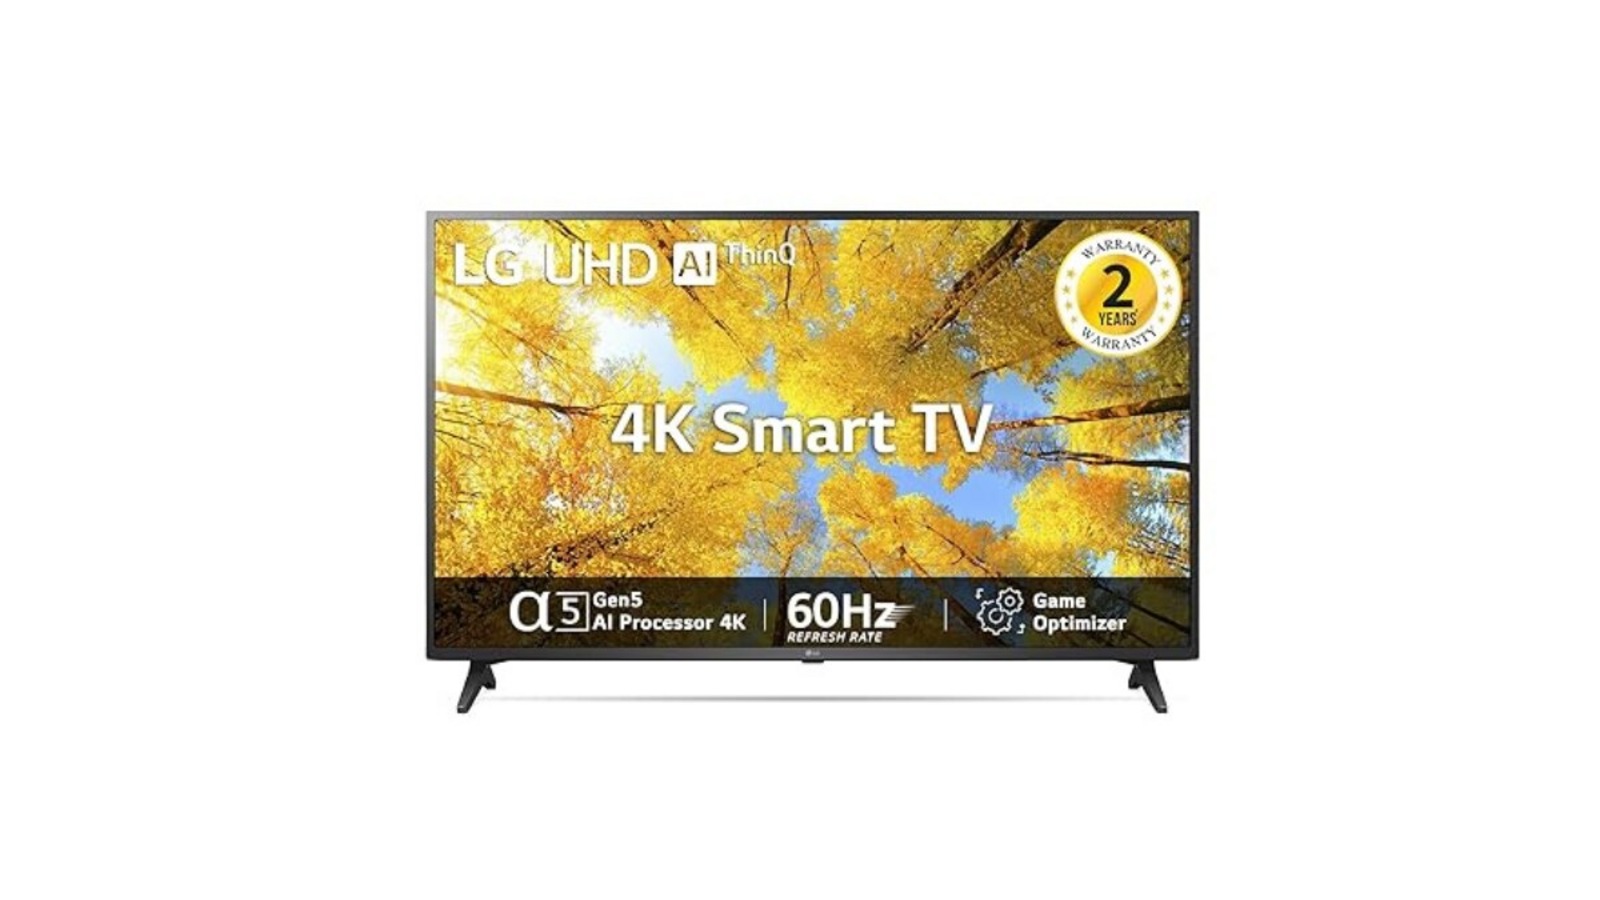 Massive sale on top smart TVs: From Sony Bravia, Kodak to LG, check deals here